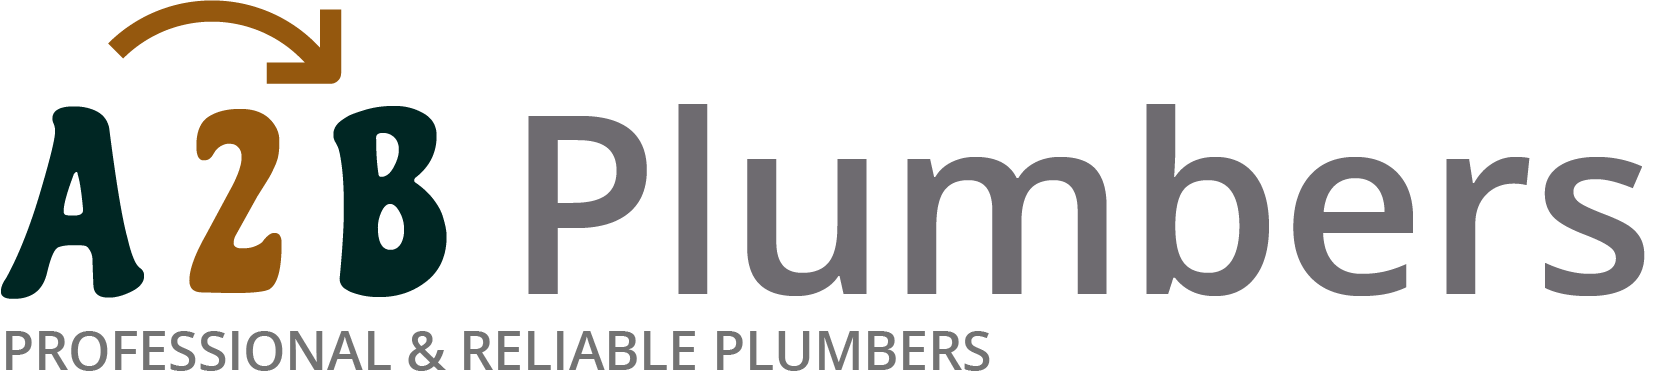 If you need a boiler installed, a radiator repaired or a leaking tap fixed, call us now - we provide services for properties in Guiseley and the local area.